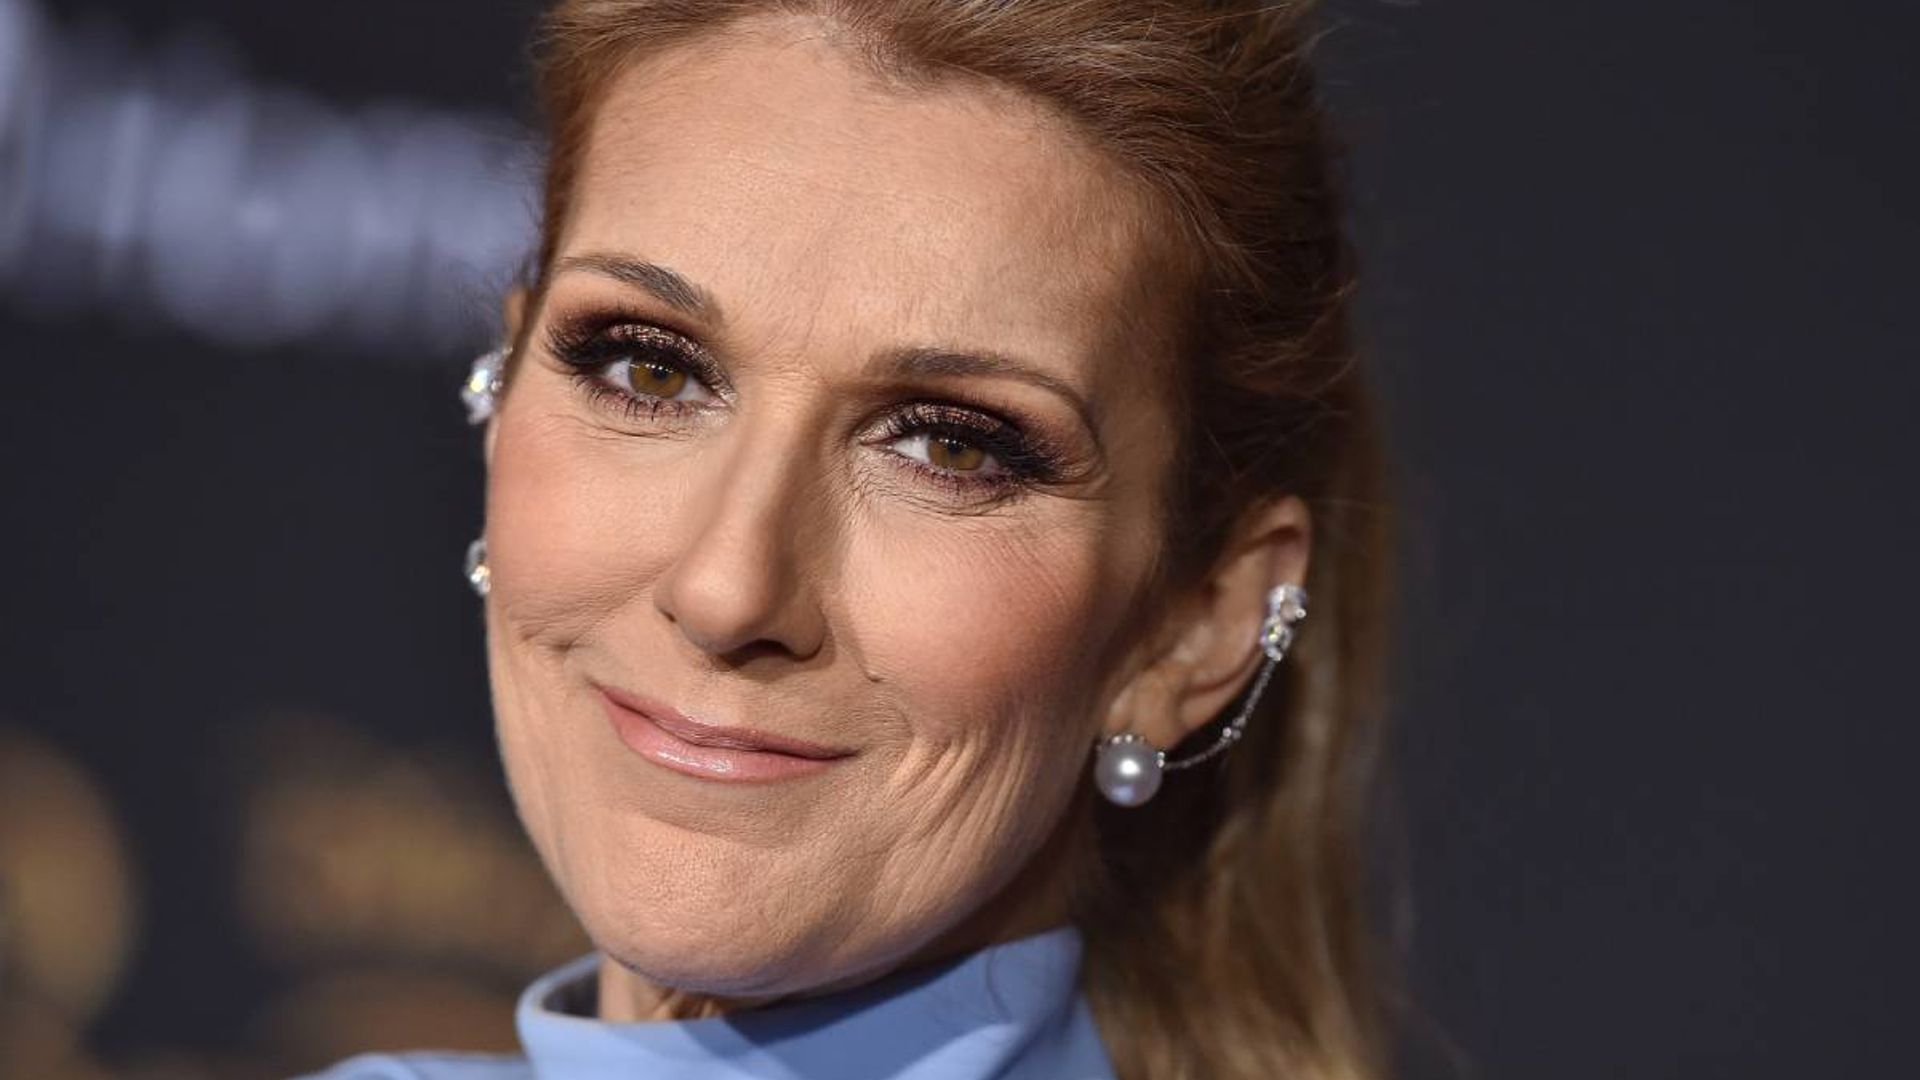 Celine Dion shares heartfelt personal message about love during Pride Month